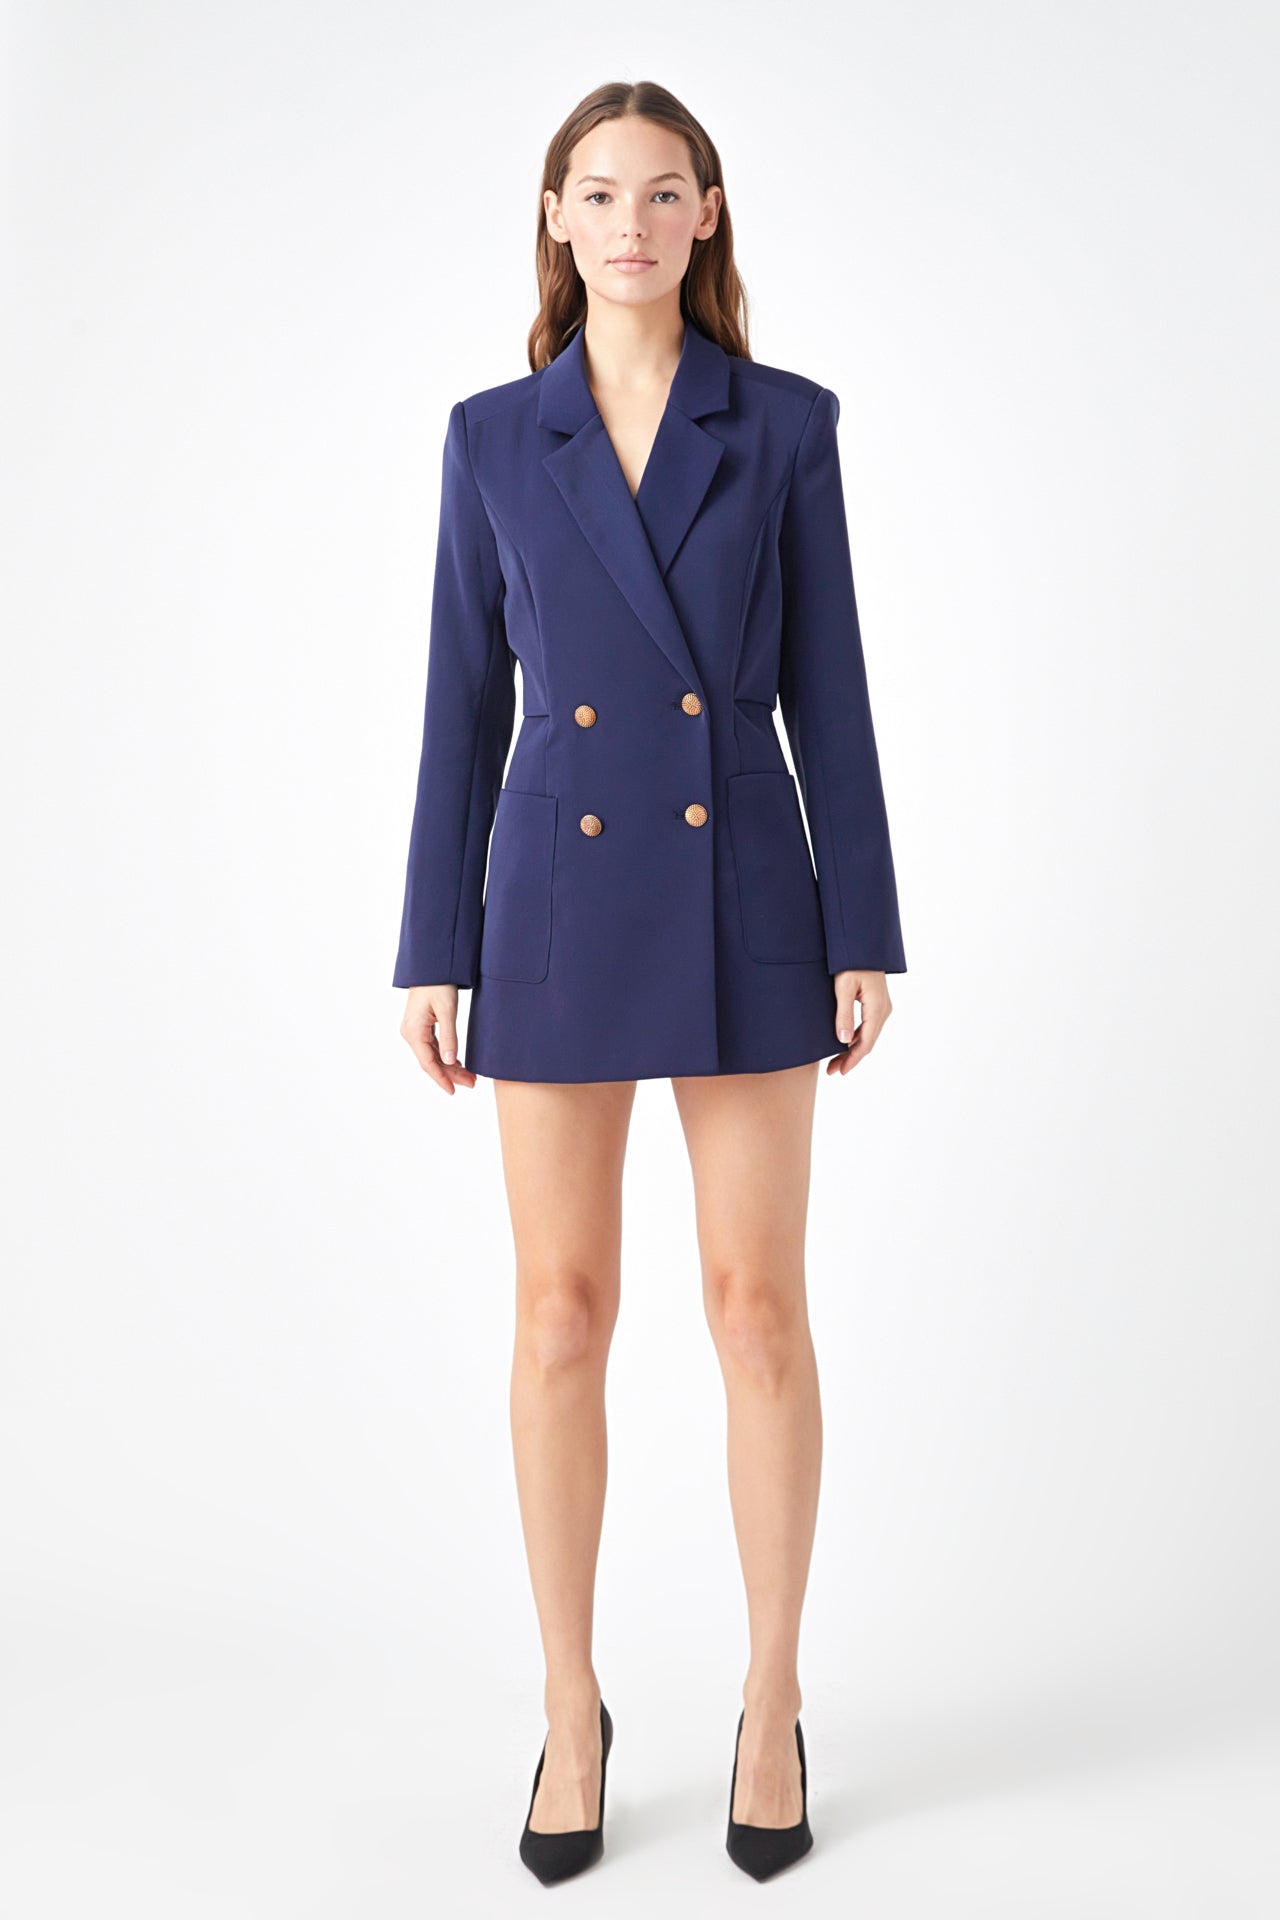 ENDLESS ROSE - Cutout Blazer Romper - ROMPERS available at Objectrare